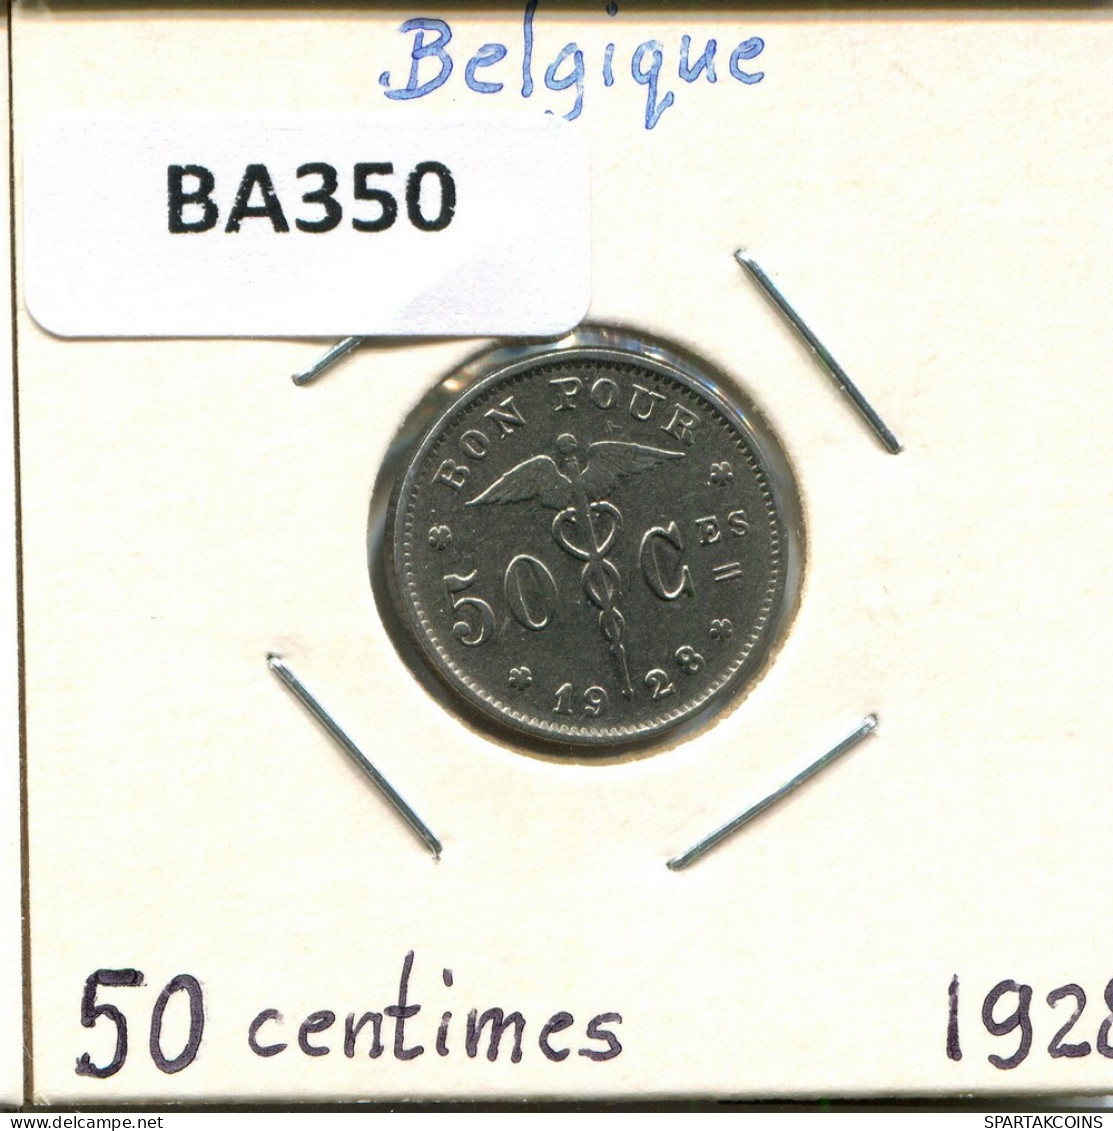 50 CENTIMES 1928 FRENCH Text BELGIUM Coin #BA350.U - 50 Cents